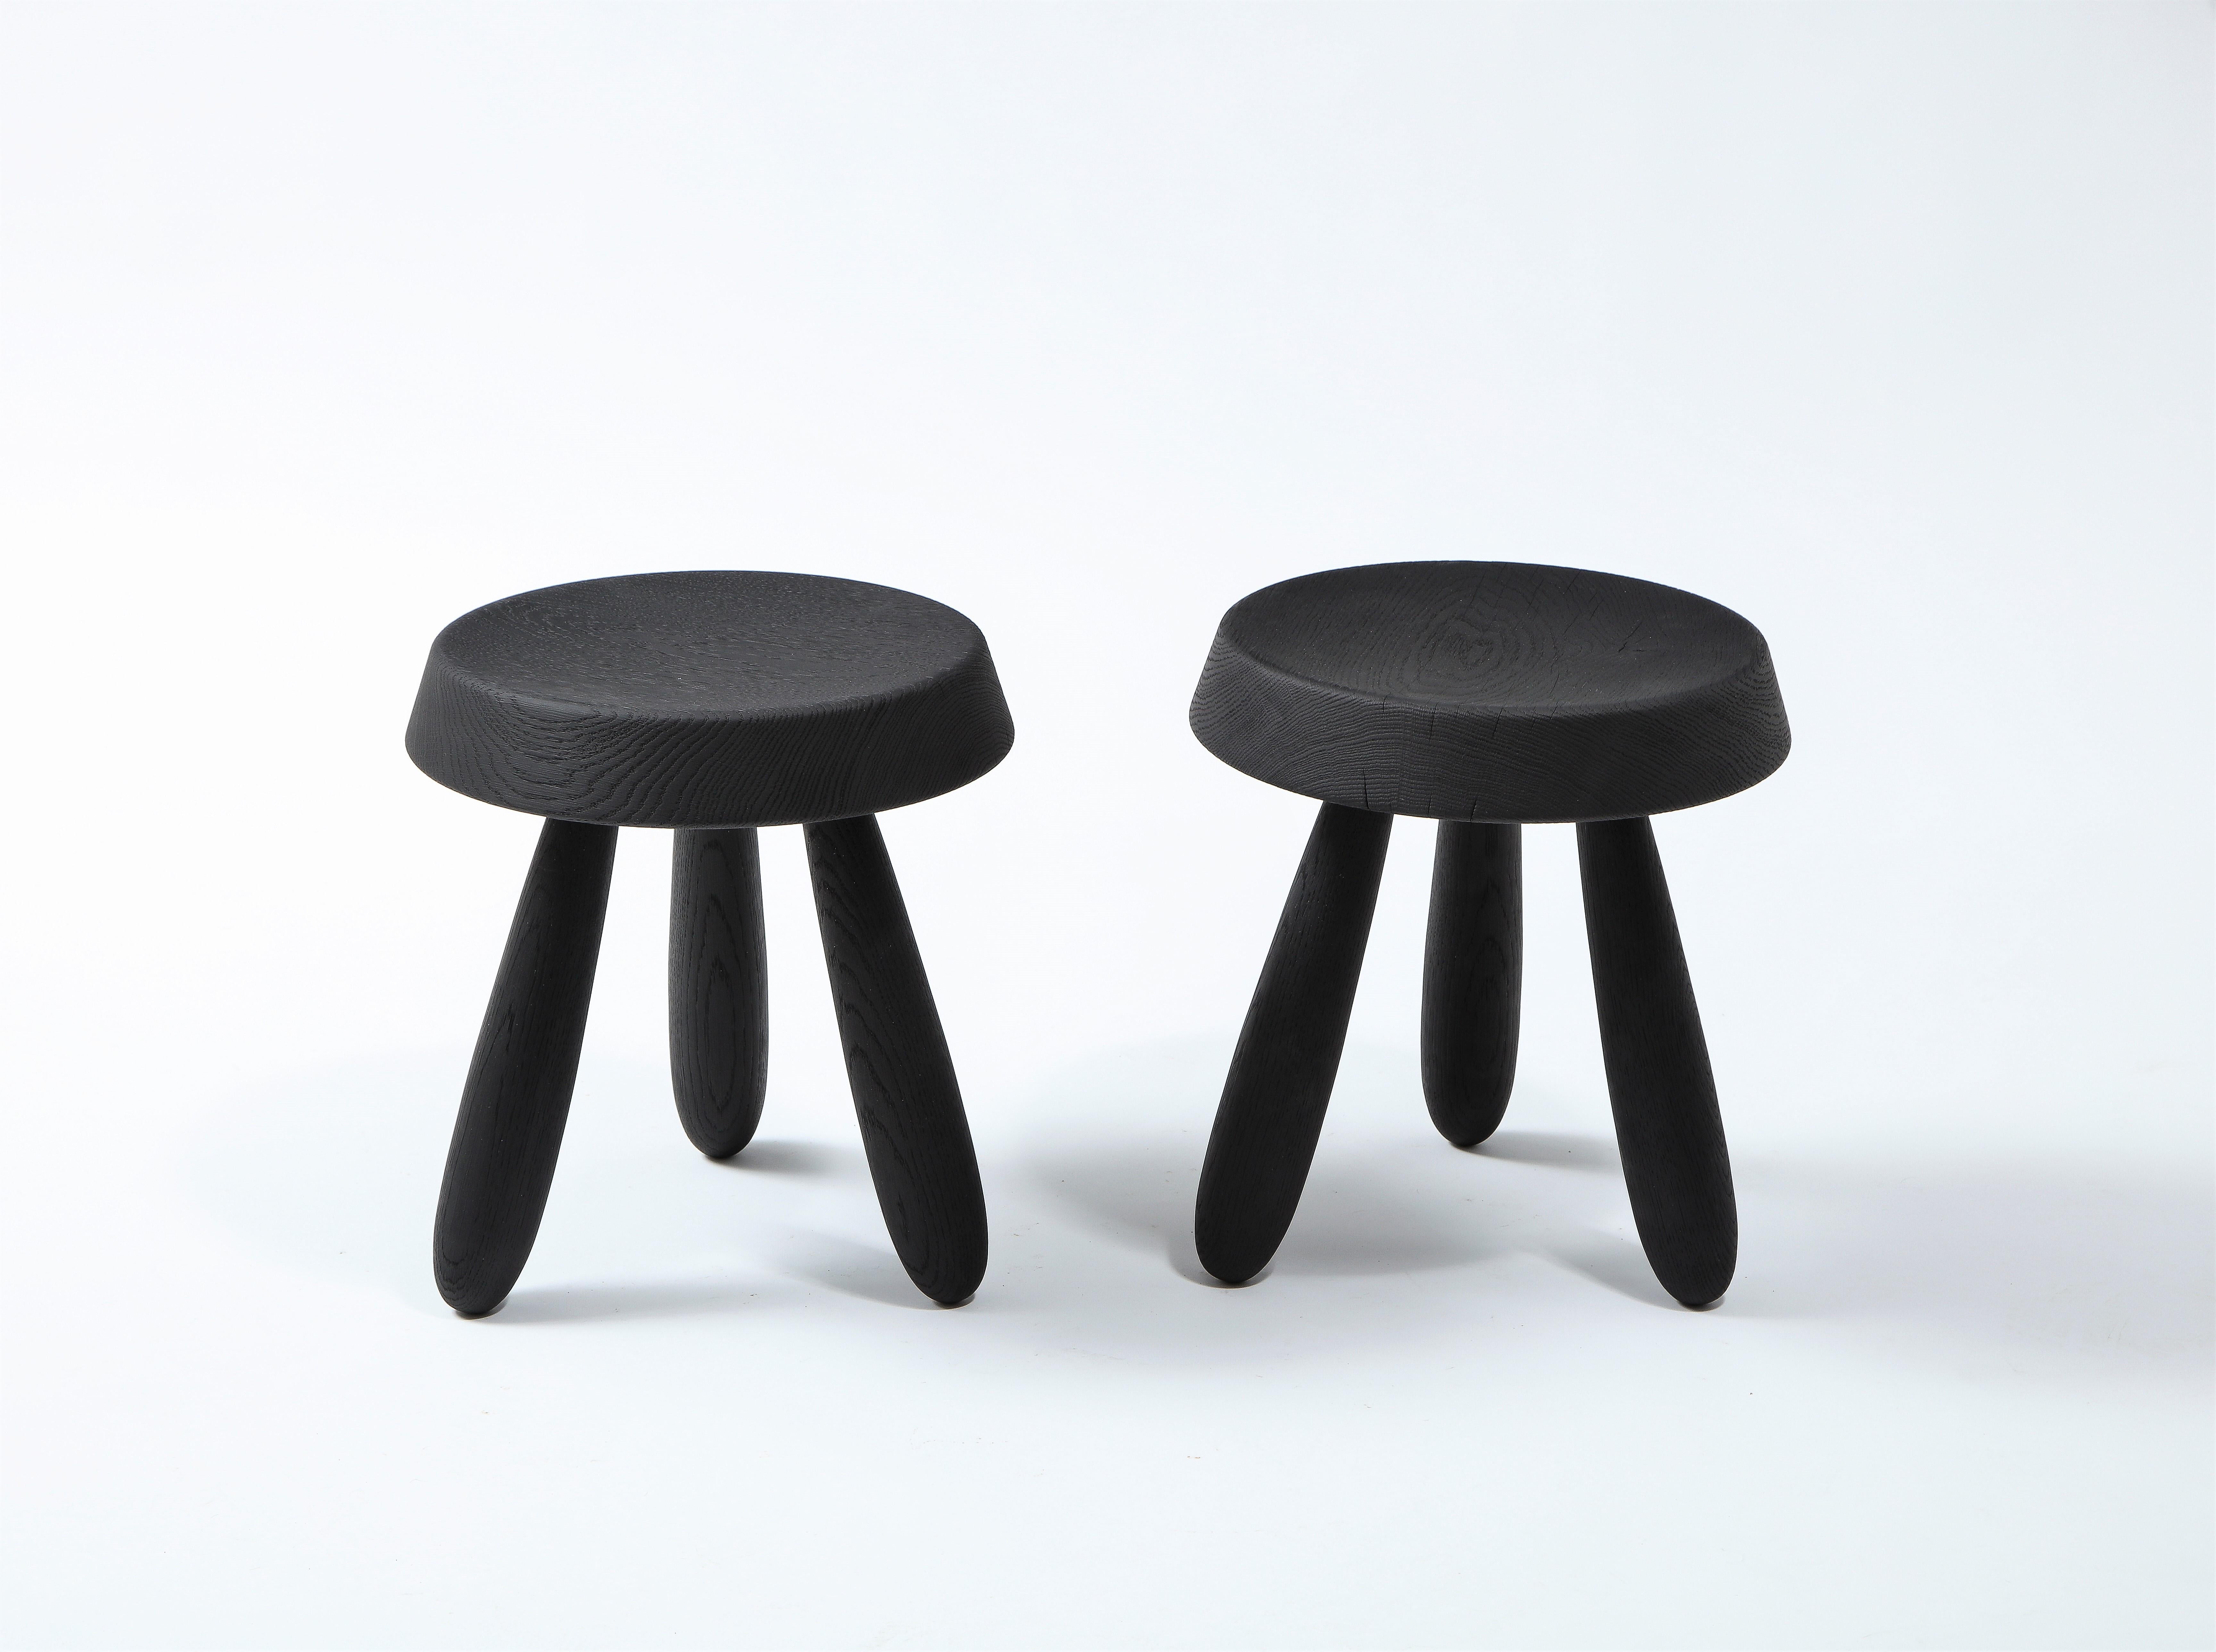 A pair of beautifully crafted tripod stools by French designer Douglas Mont and produced by Facto Atelier Paris. A thick beveled seat sits on three spindle shaped feet. Burnt Oak finish with visible wood grain. Appearance, cracks and grain may